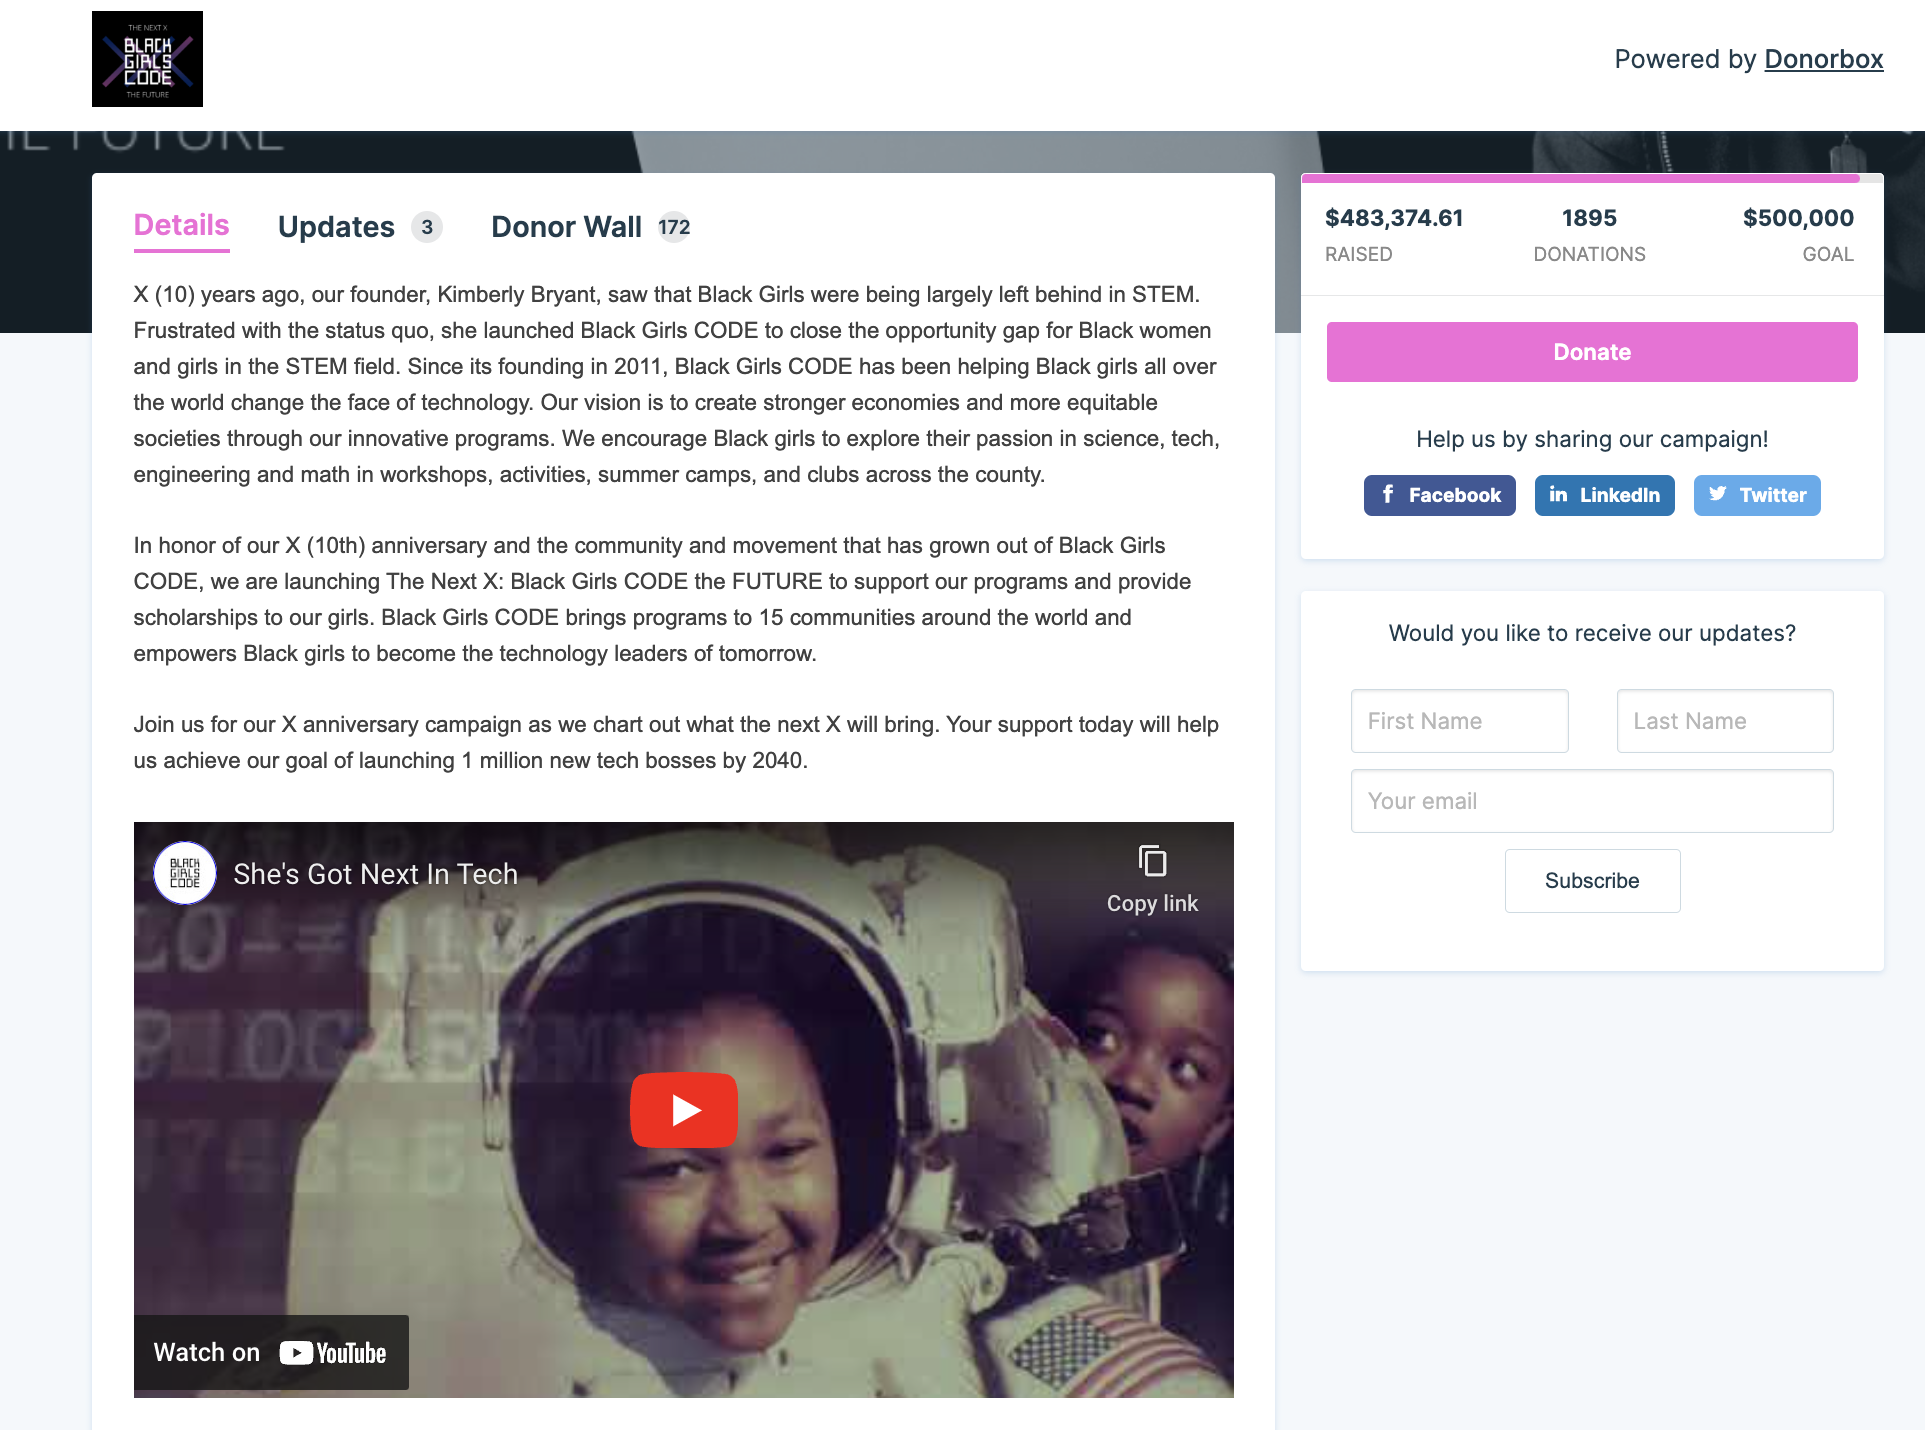 Screenshot of a Donorbox crowdfunding campaign run by Black Girls Code. 